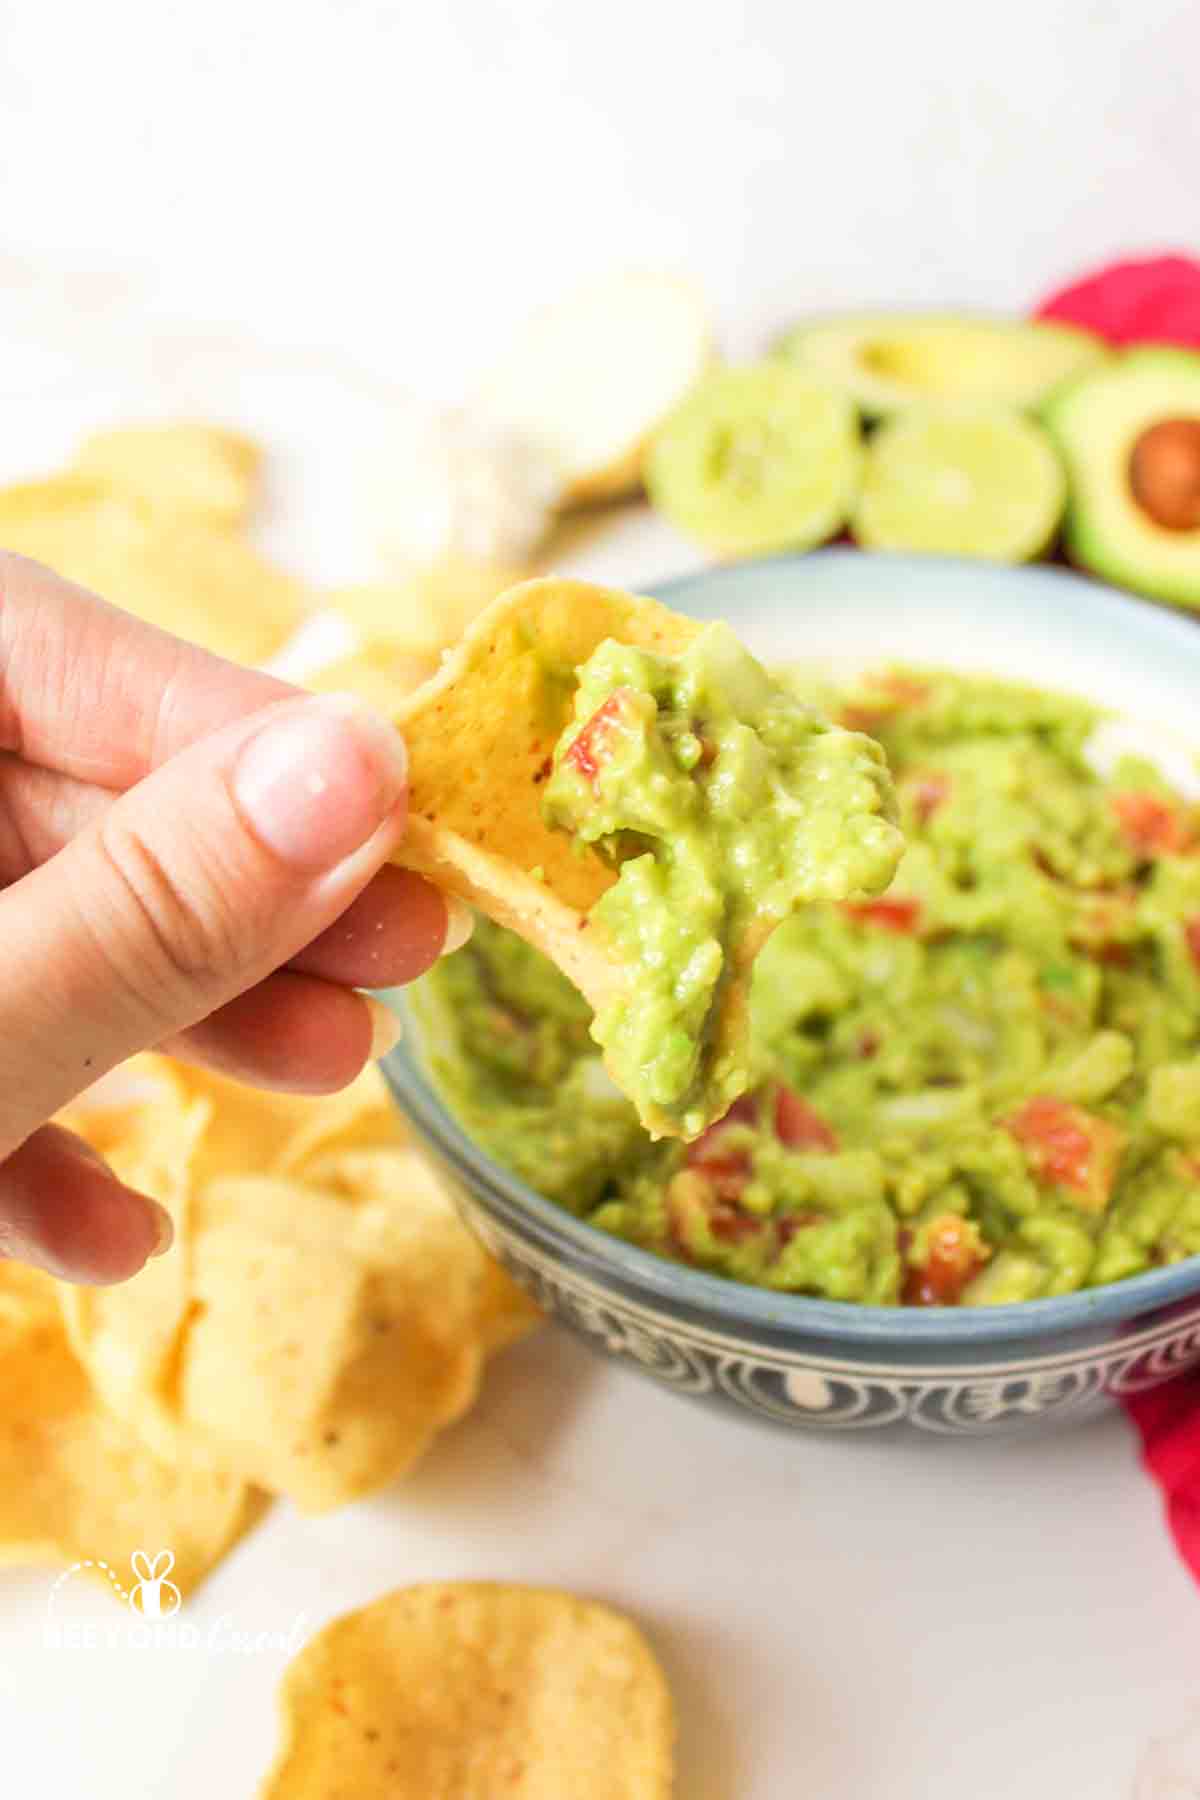 a hand holding up a tortilla chip with a scoop of guacamole on it.